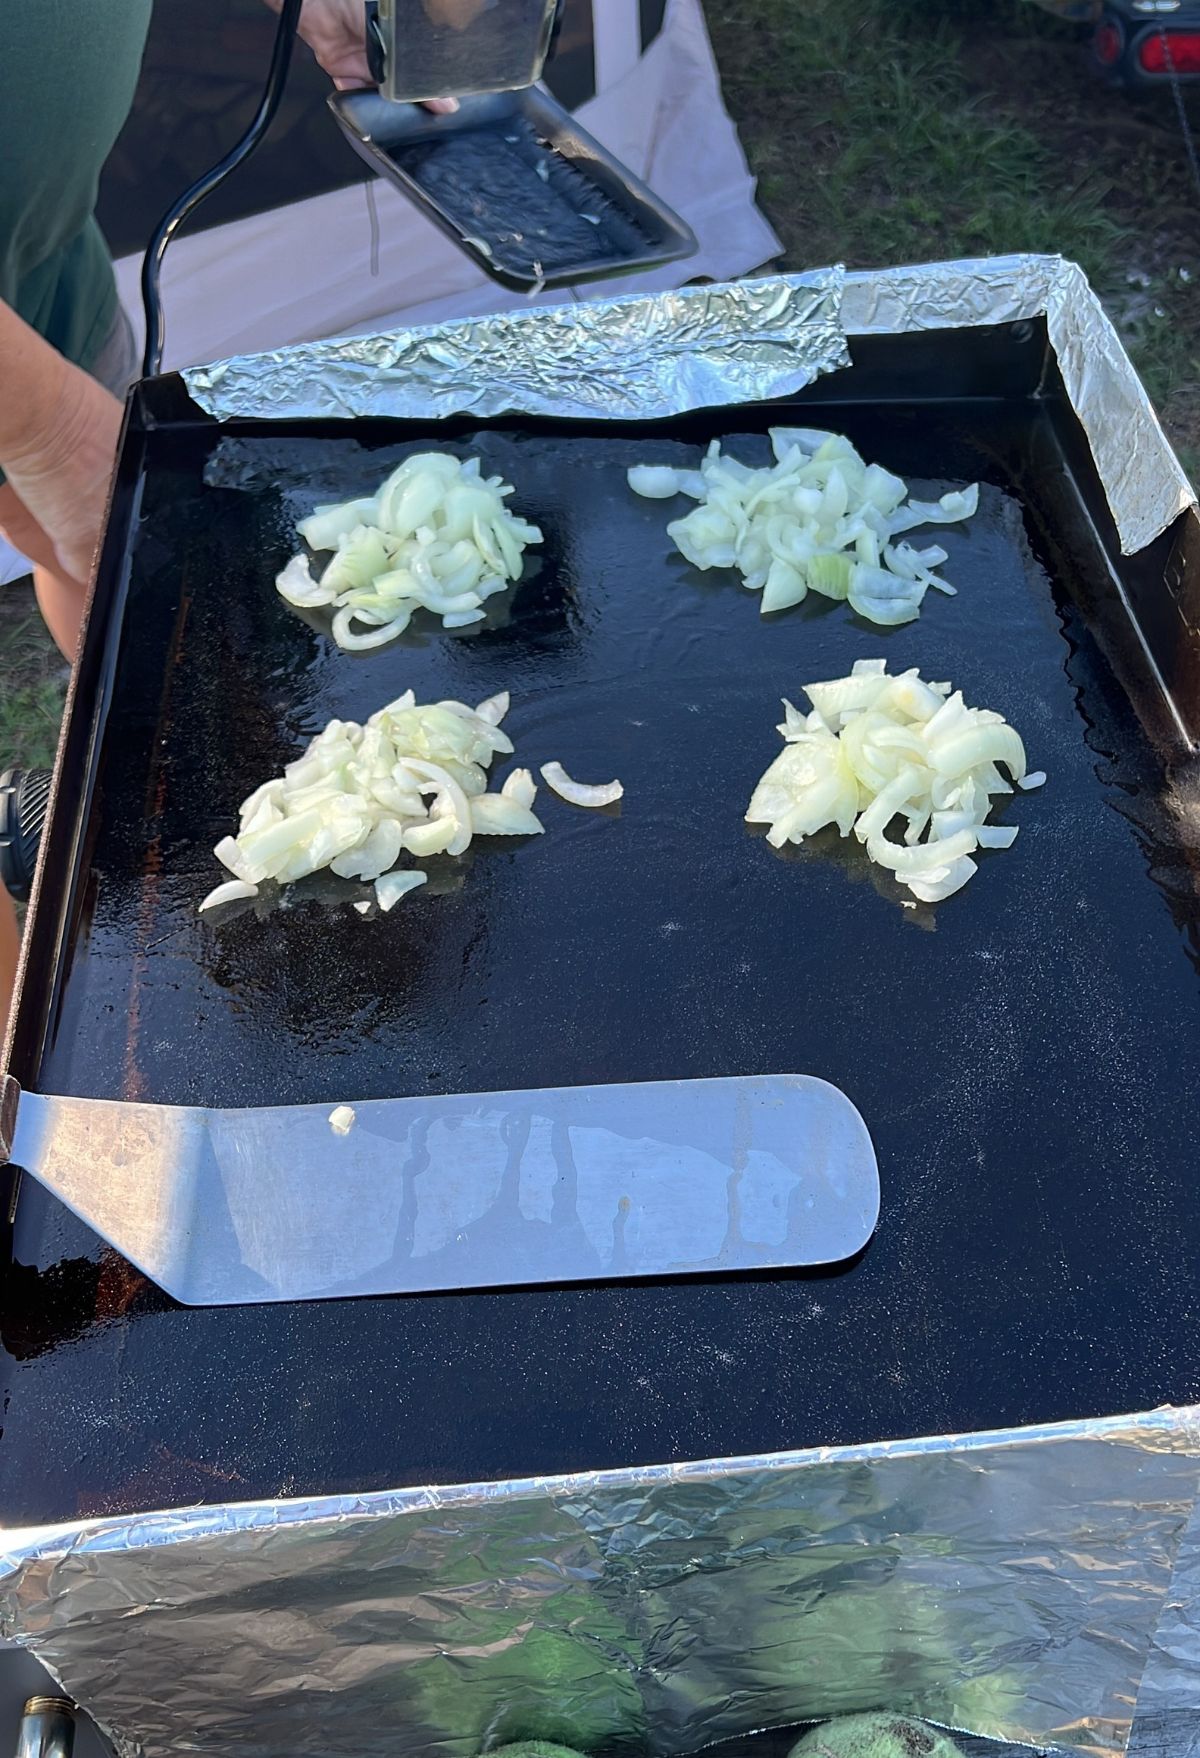 A person is putting onions on a griddle.